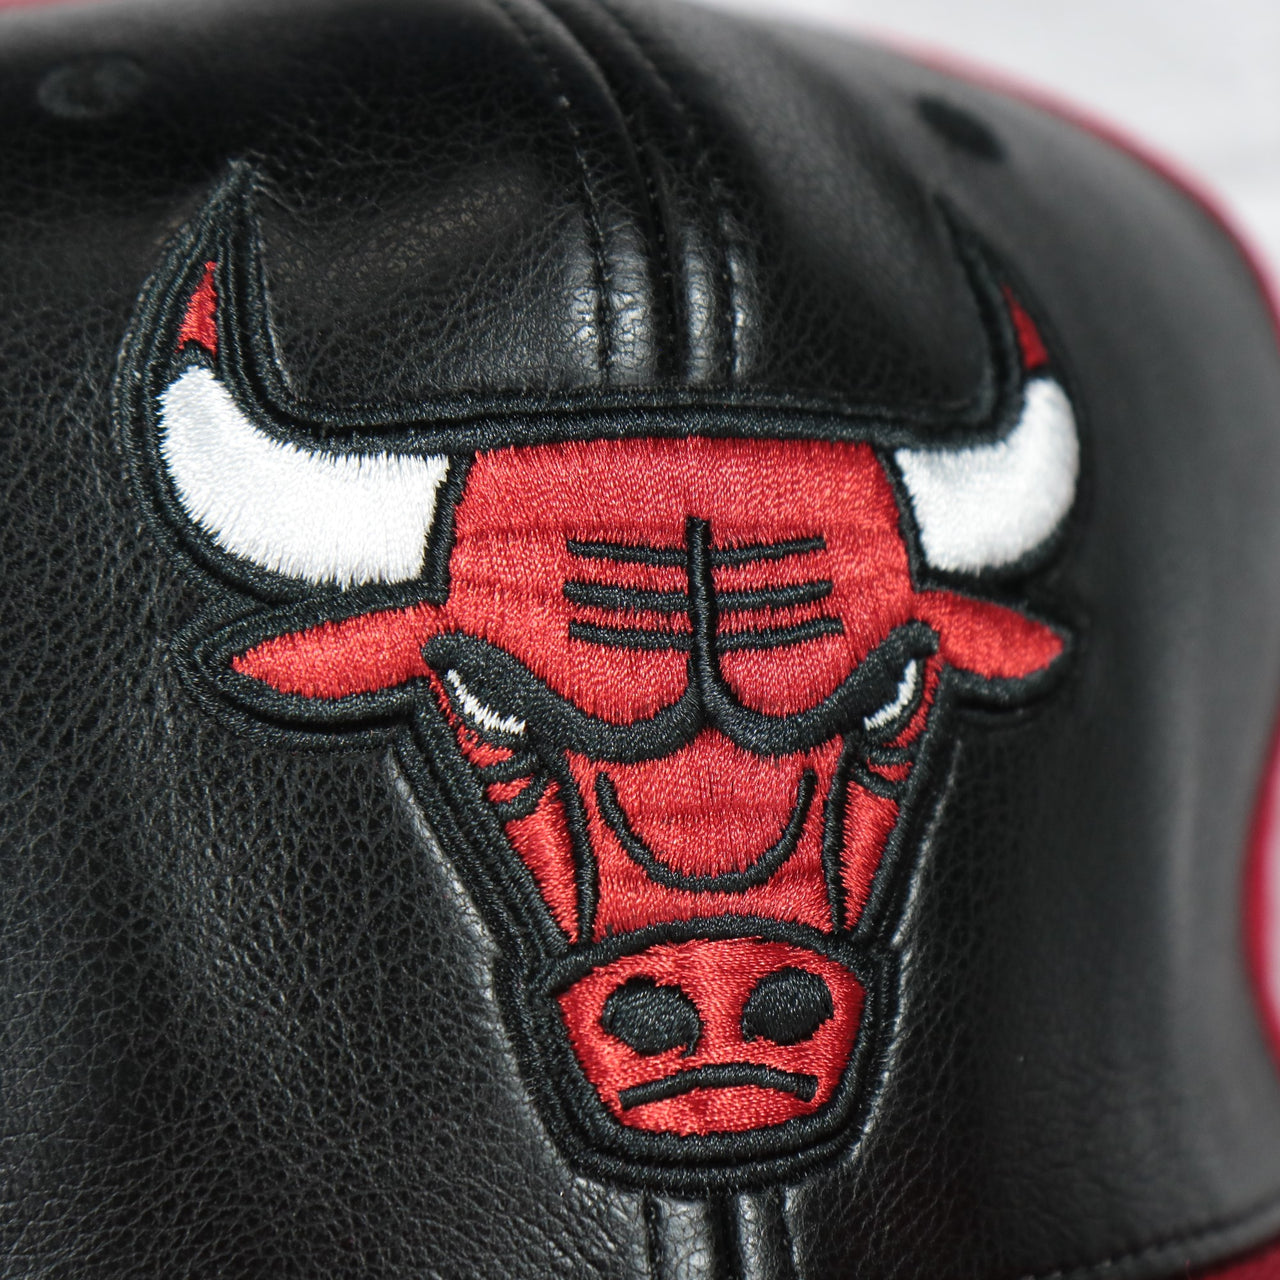 Chicago Bulls Day One Sneaker Hookup Red bottom Two-Tone | Black/Red Snapback Hat